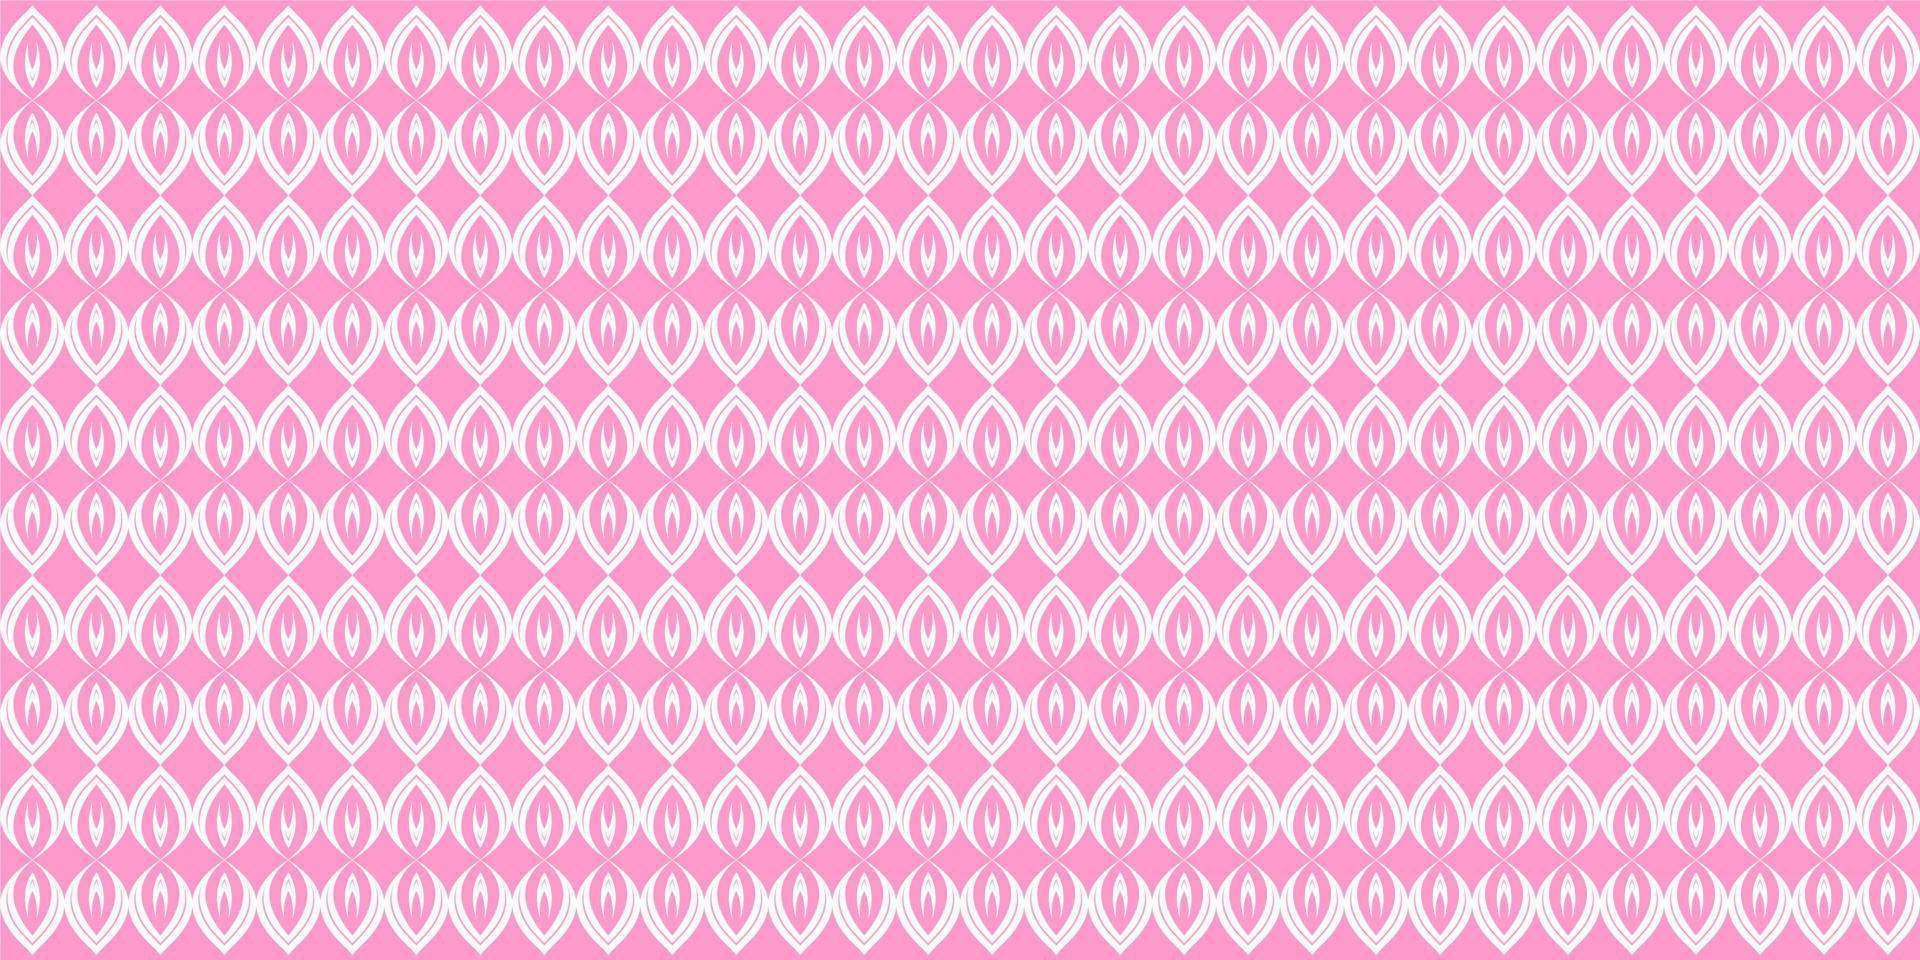 Leaves pattern vector background pink. free vector